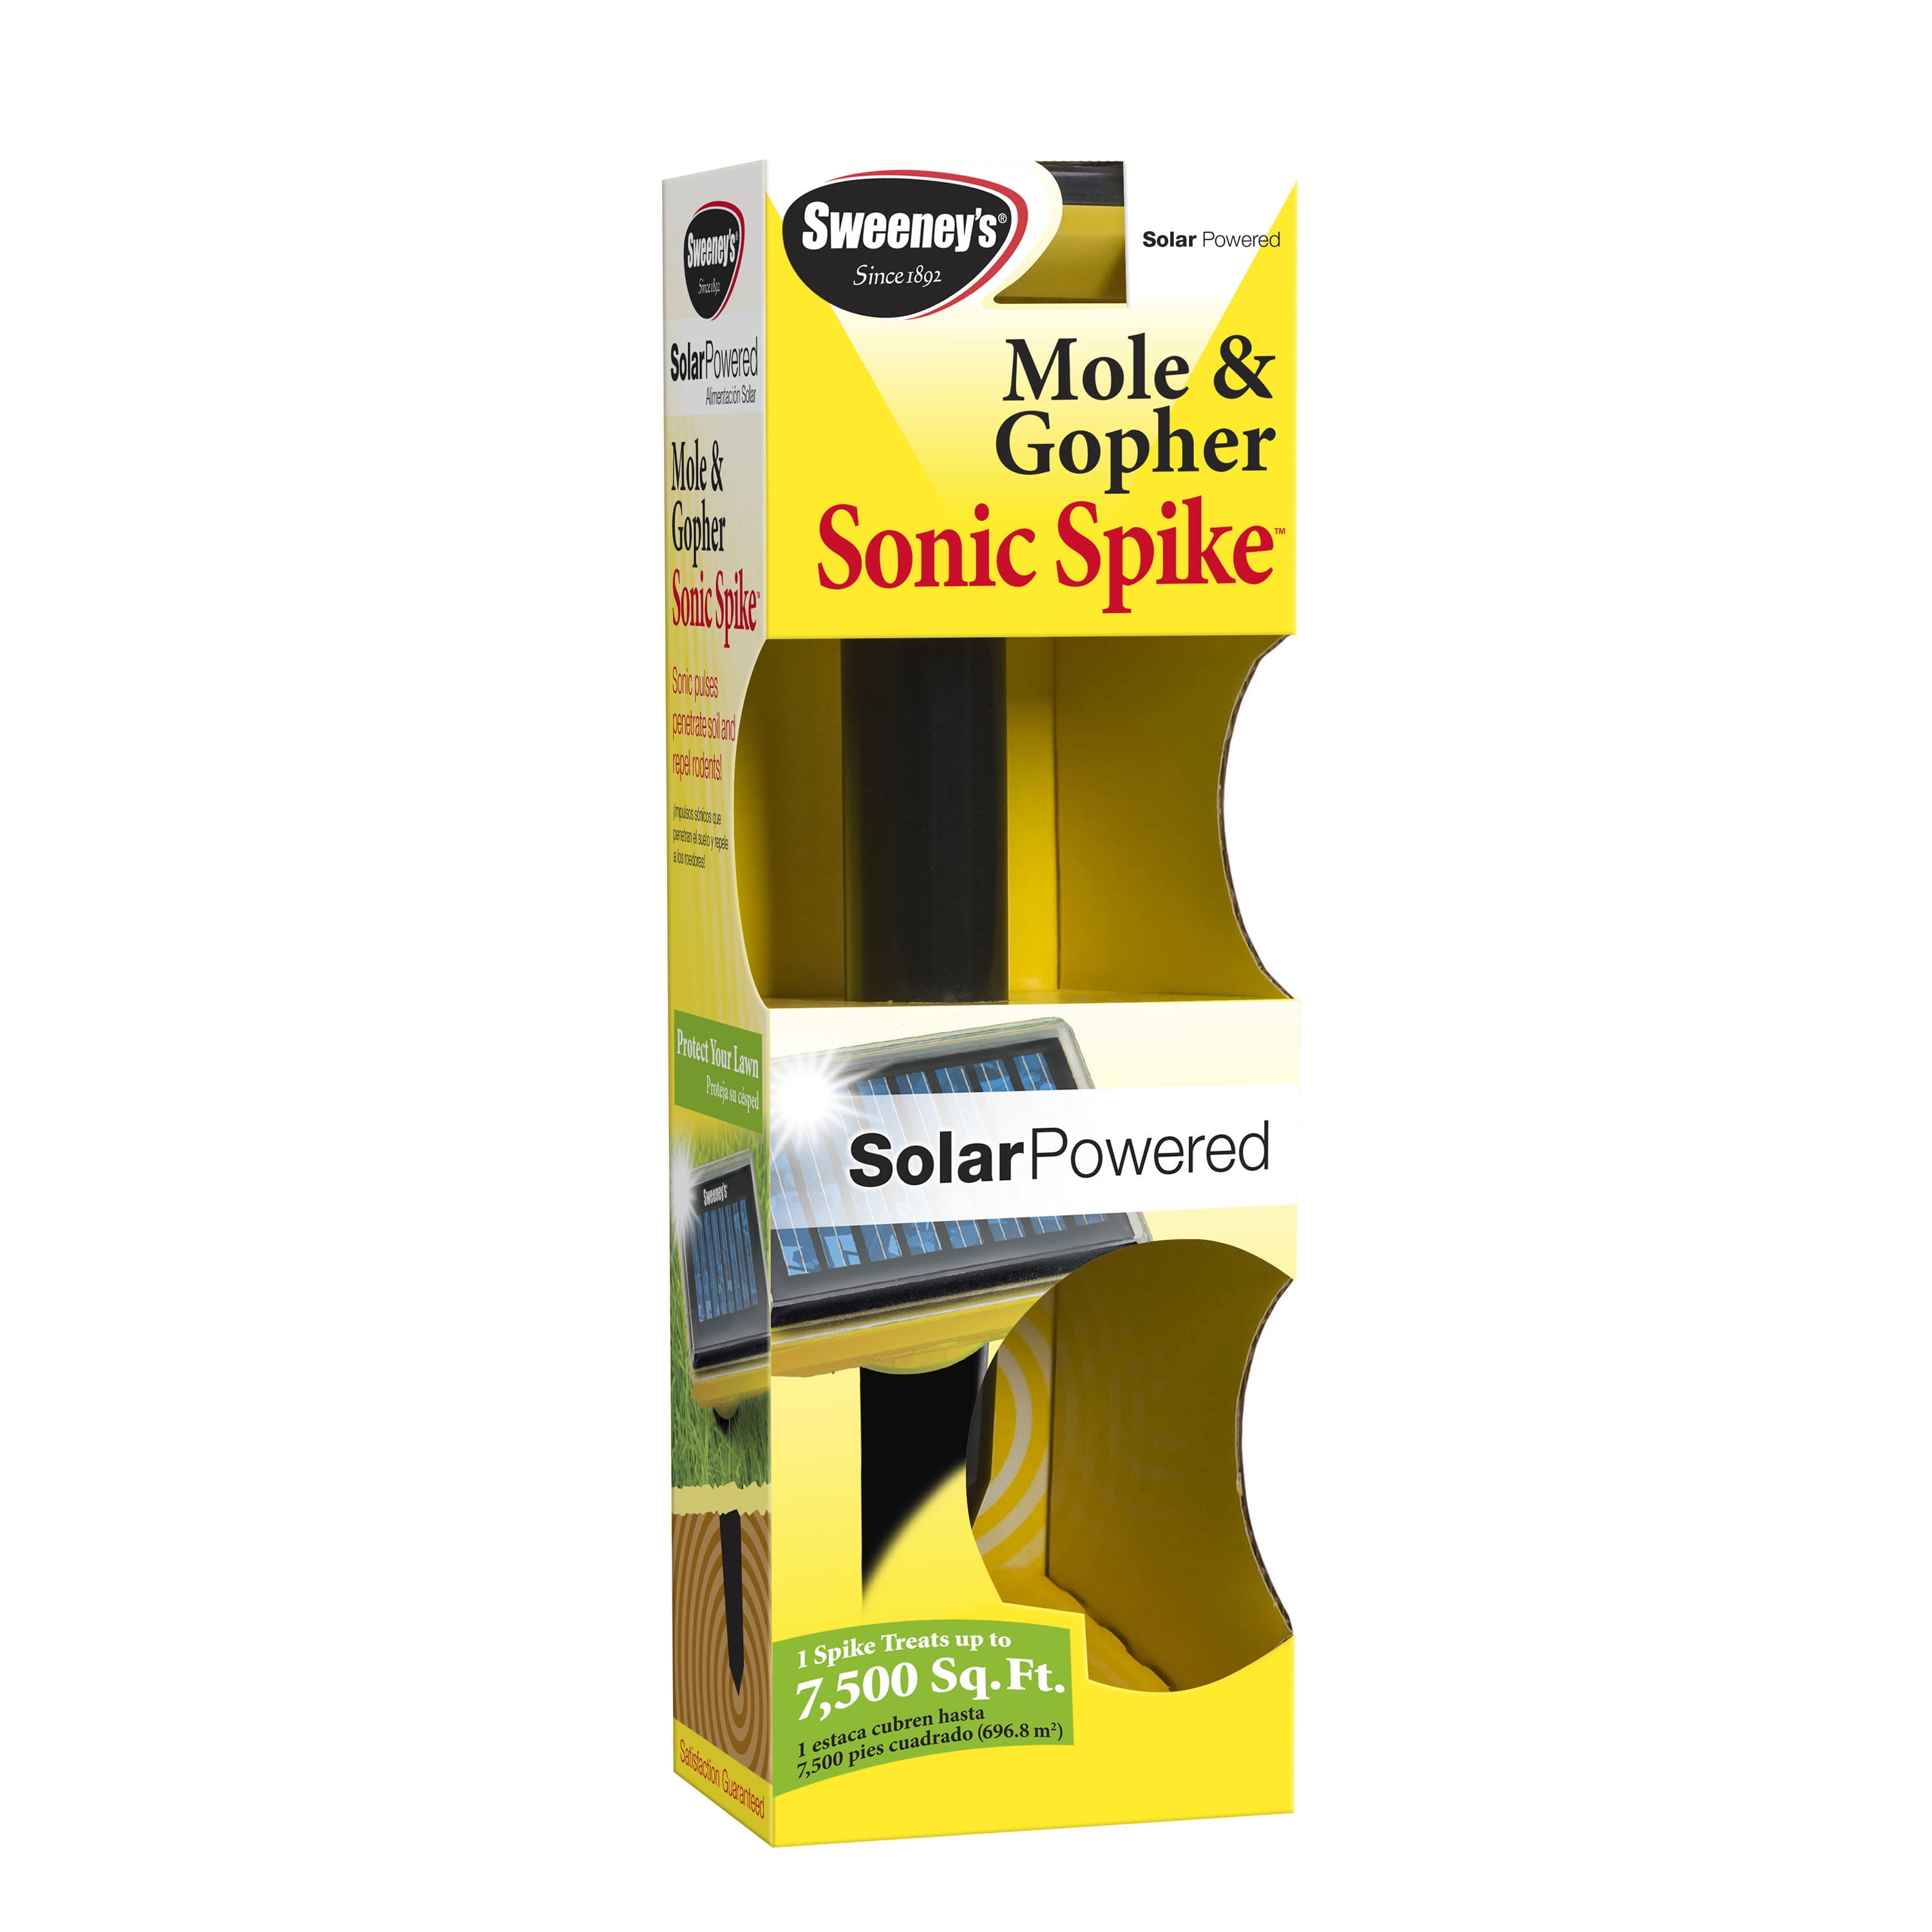 P3 International Sol-Mate Solar Powered Sonic Mole and Gopher Chaser P3-P7911 